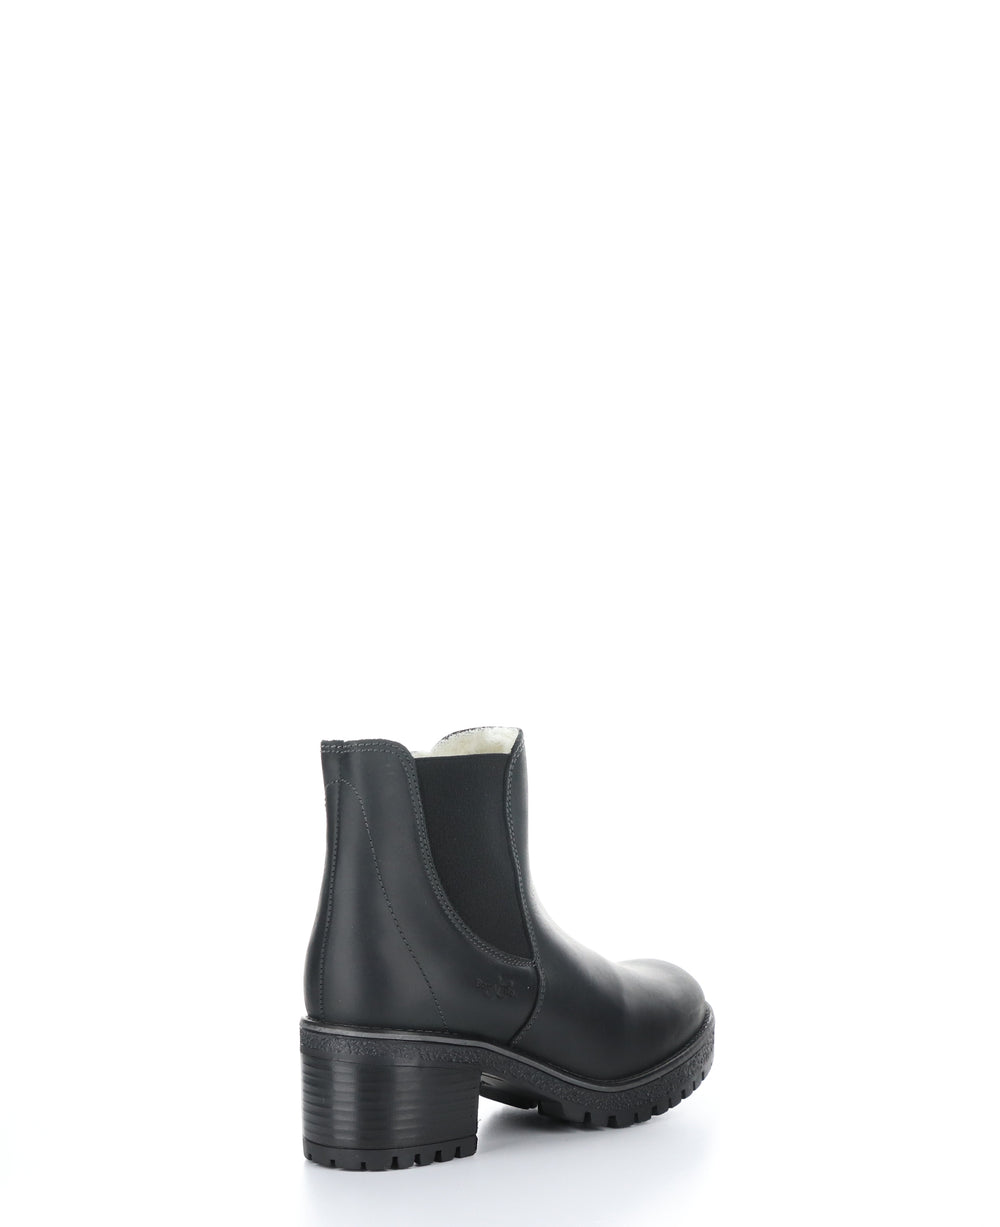 MASI Black Zip Up Ankle Boots